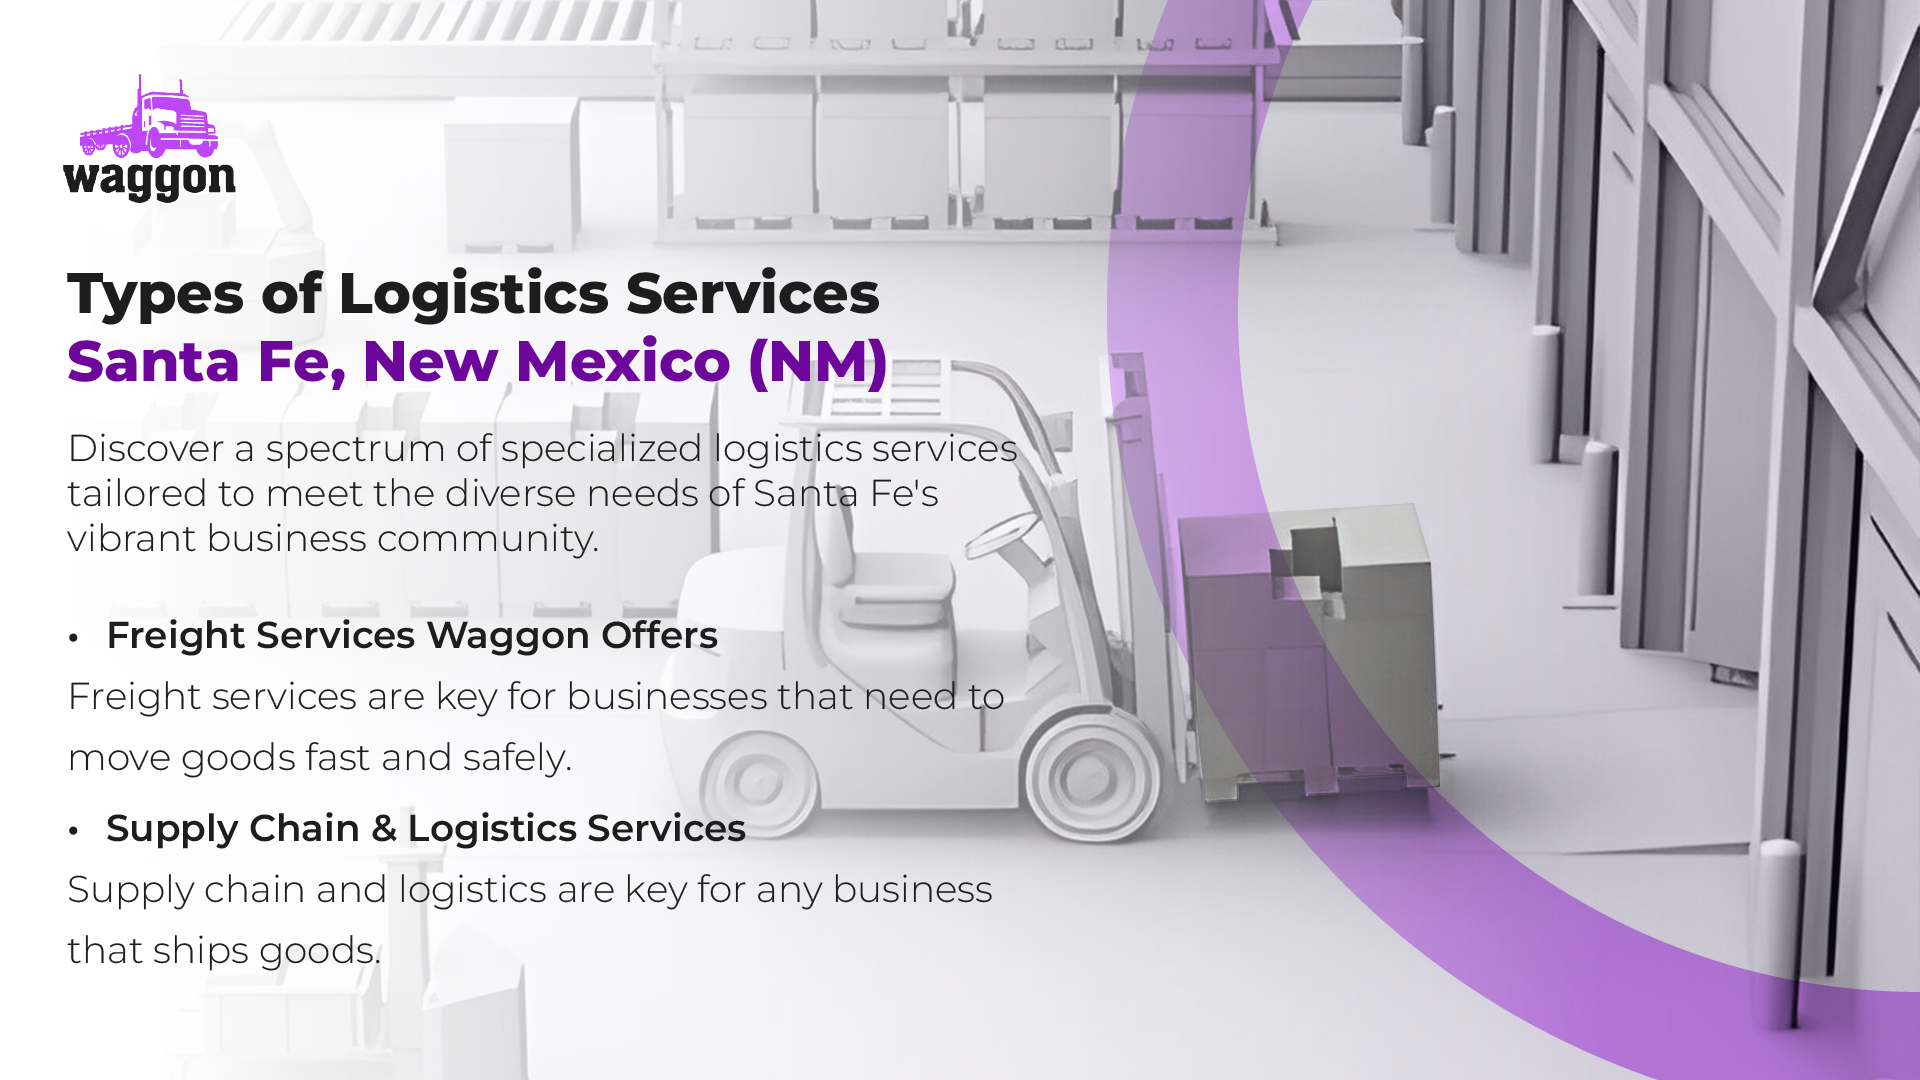 Types of Logistics Services in Santa Fe, New Mexico (NM)